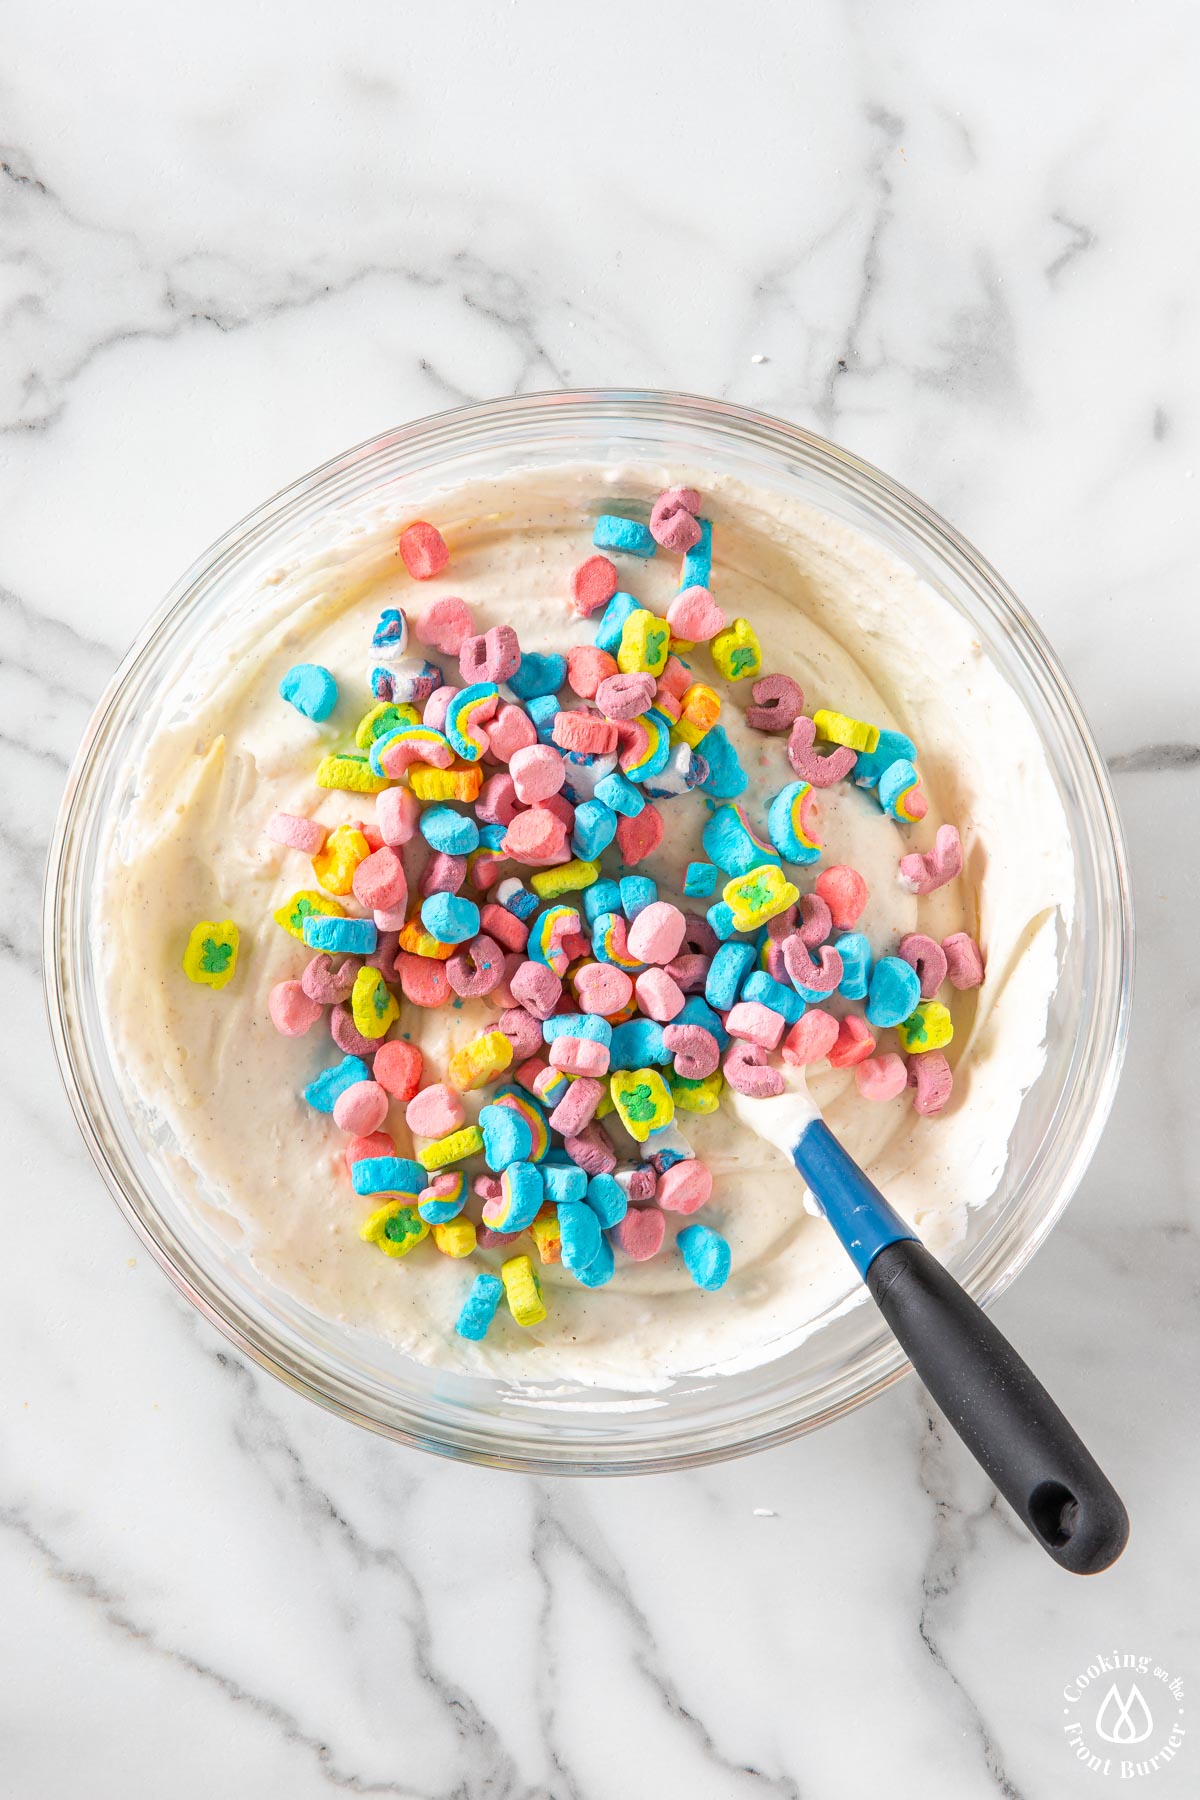 lucky charms on top of a whipped cereal cereal mixture in a clear bowl